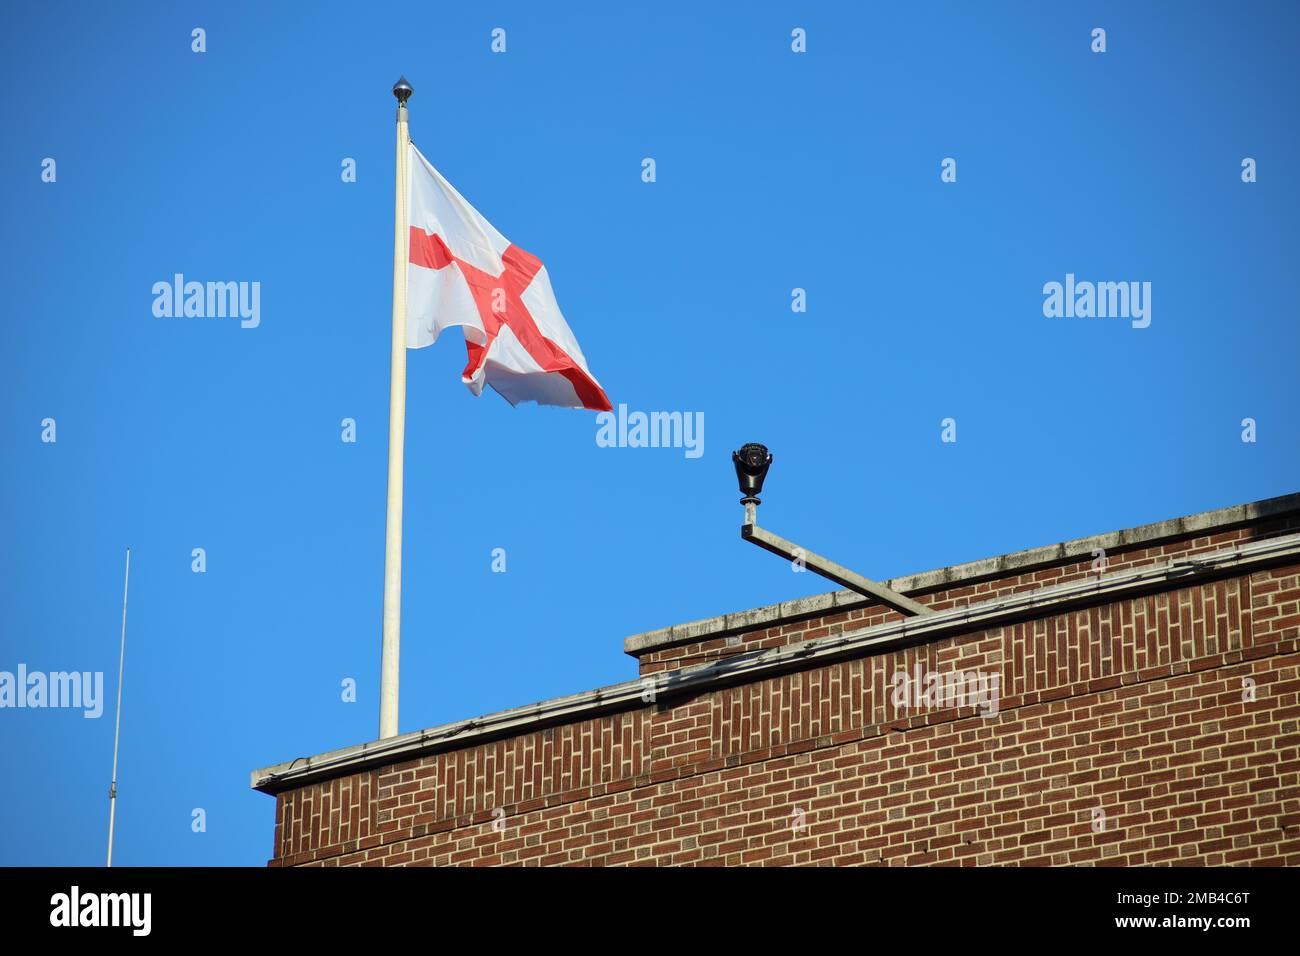 London, UK- Jan 19 2023: The flag of England flying on the rooftop of a brick building. Credit: Sinai Noor/Alamy Stock Photo